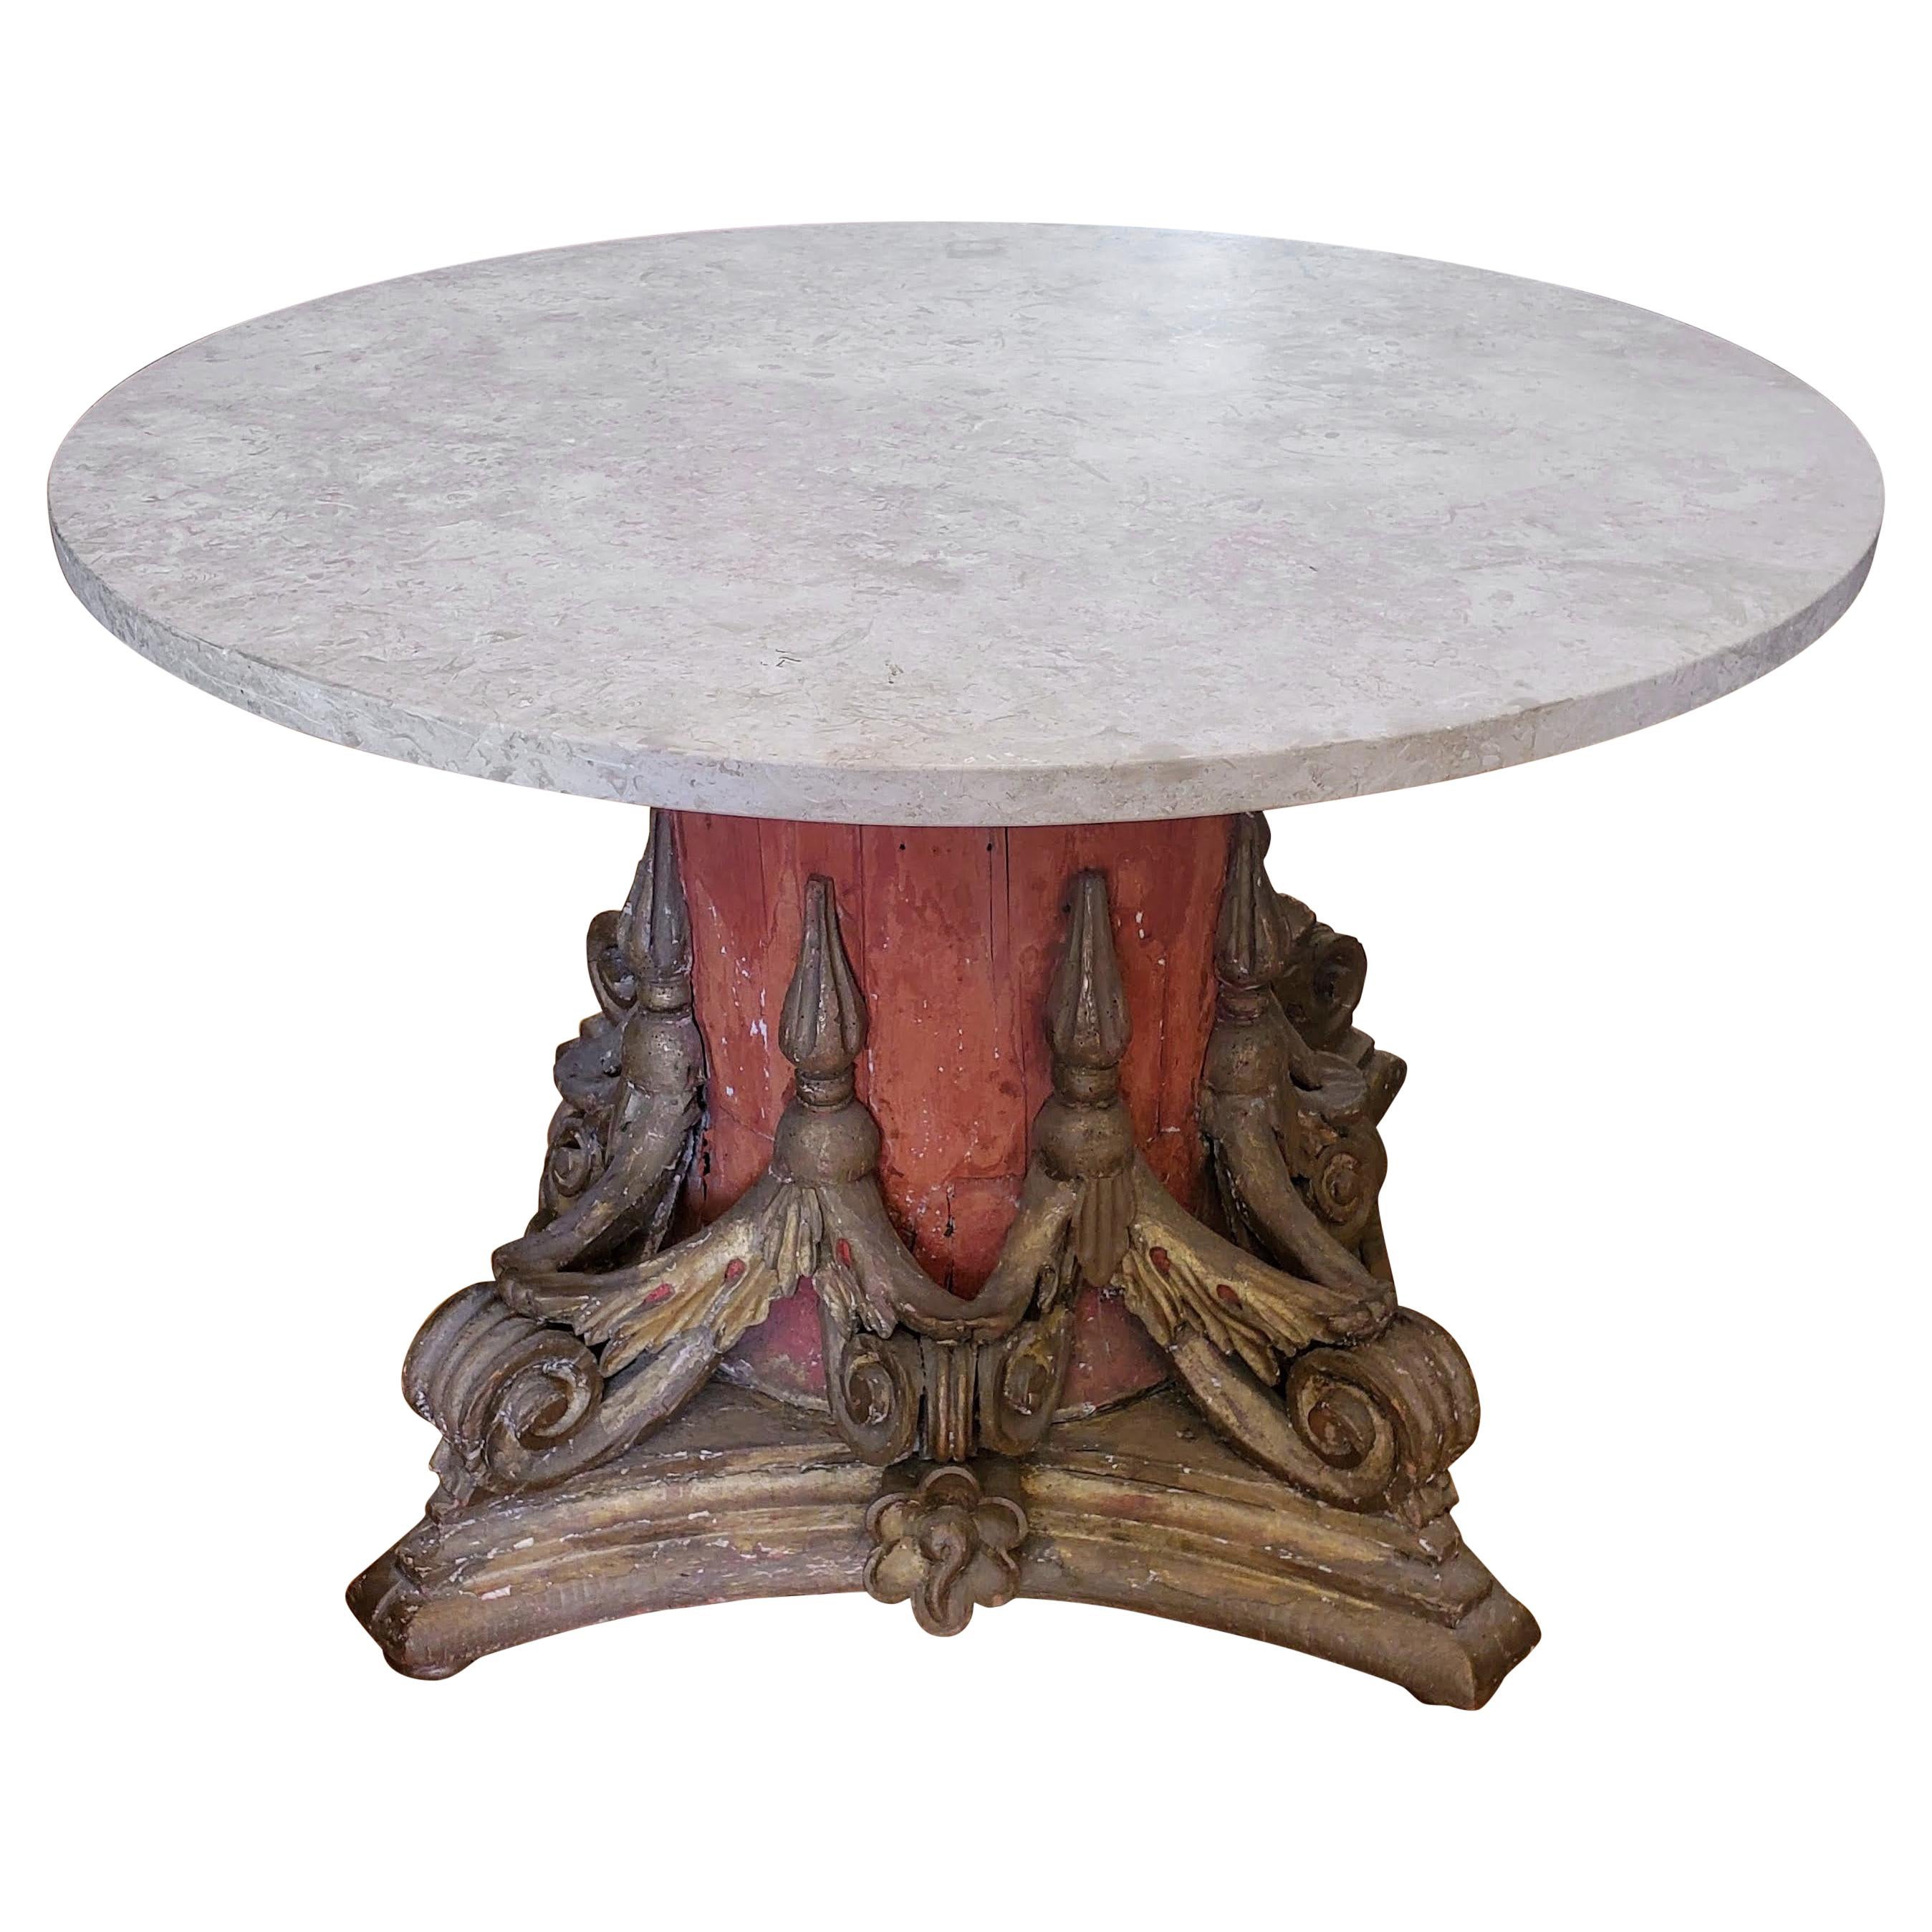 Large 18th Century Venetian Architectural Carved Capital Table with Marble Top